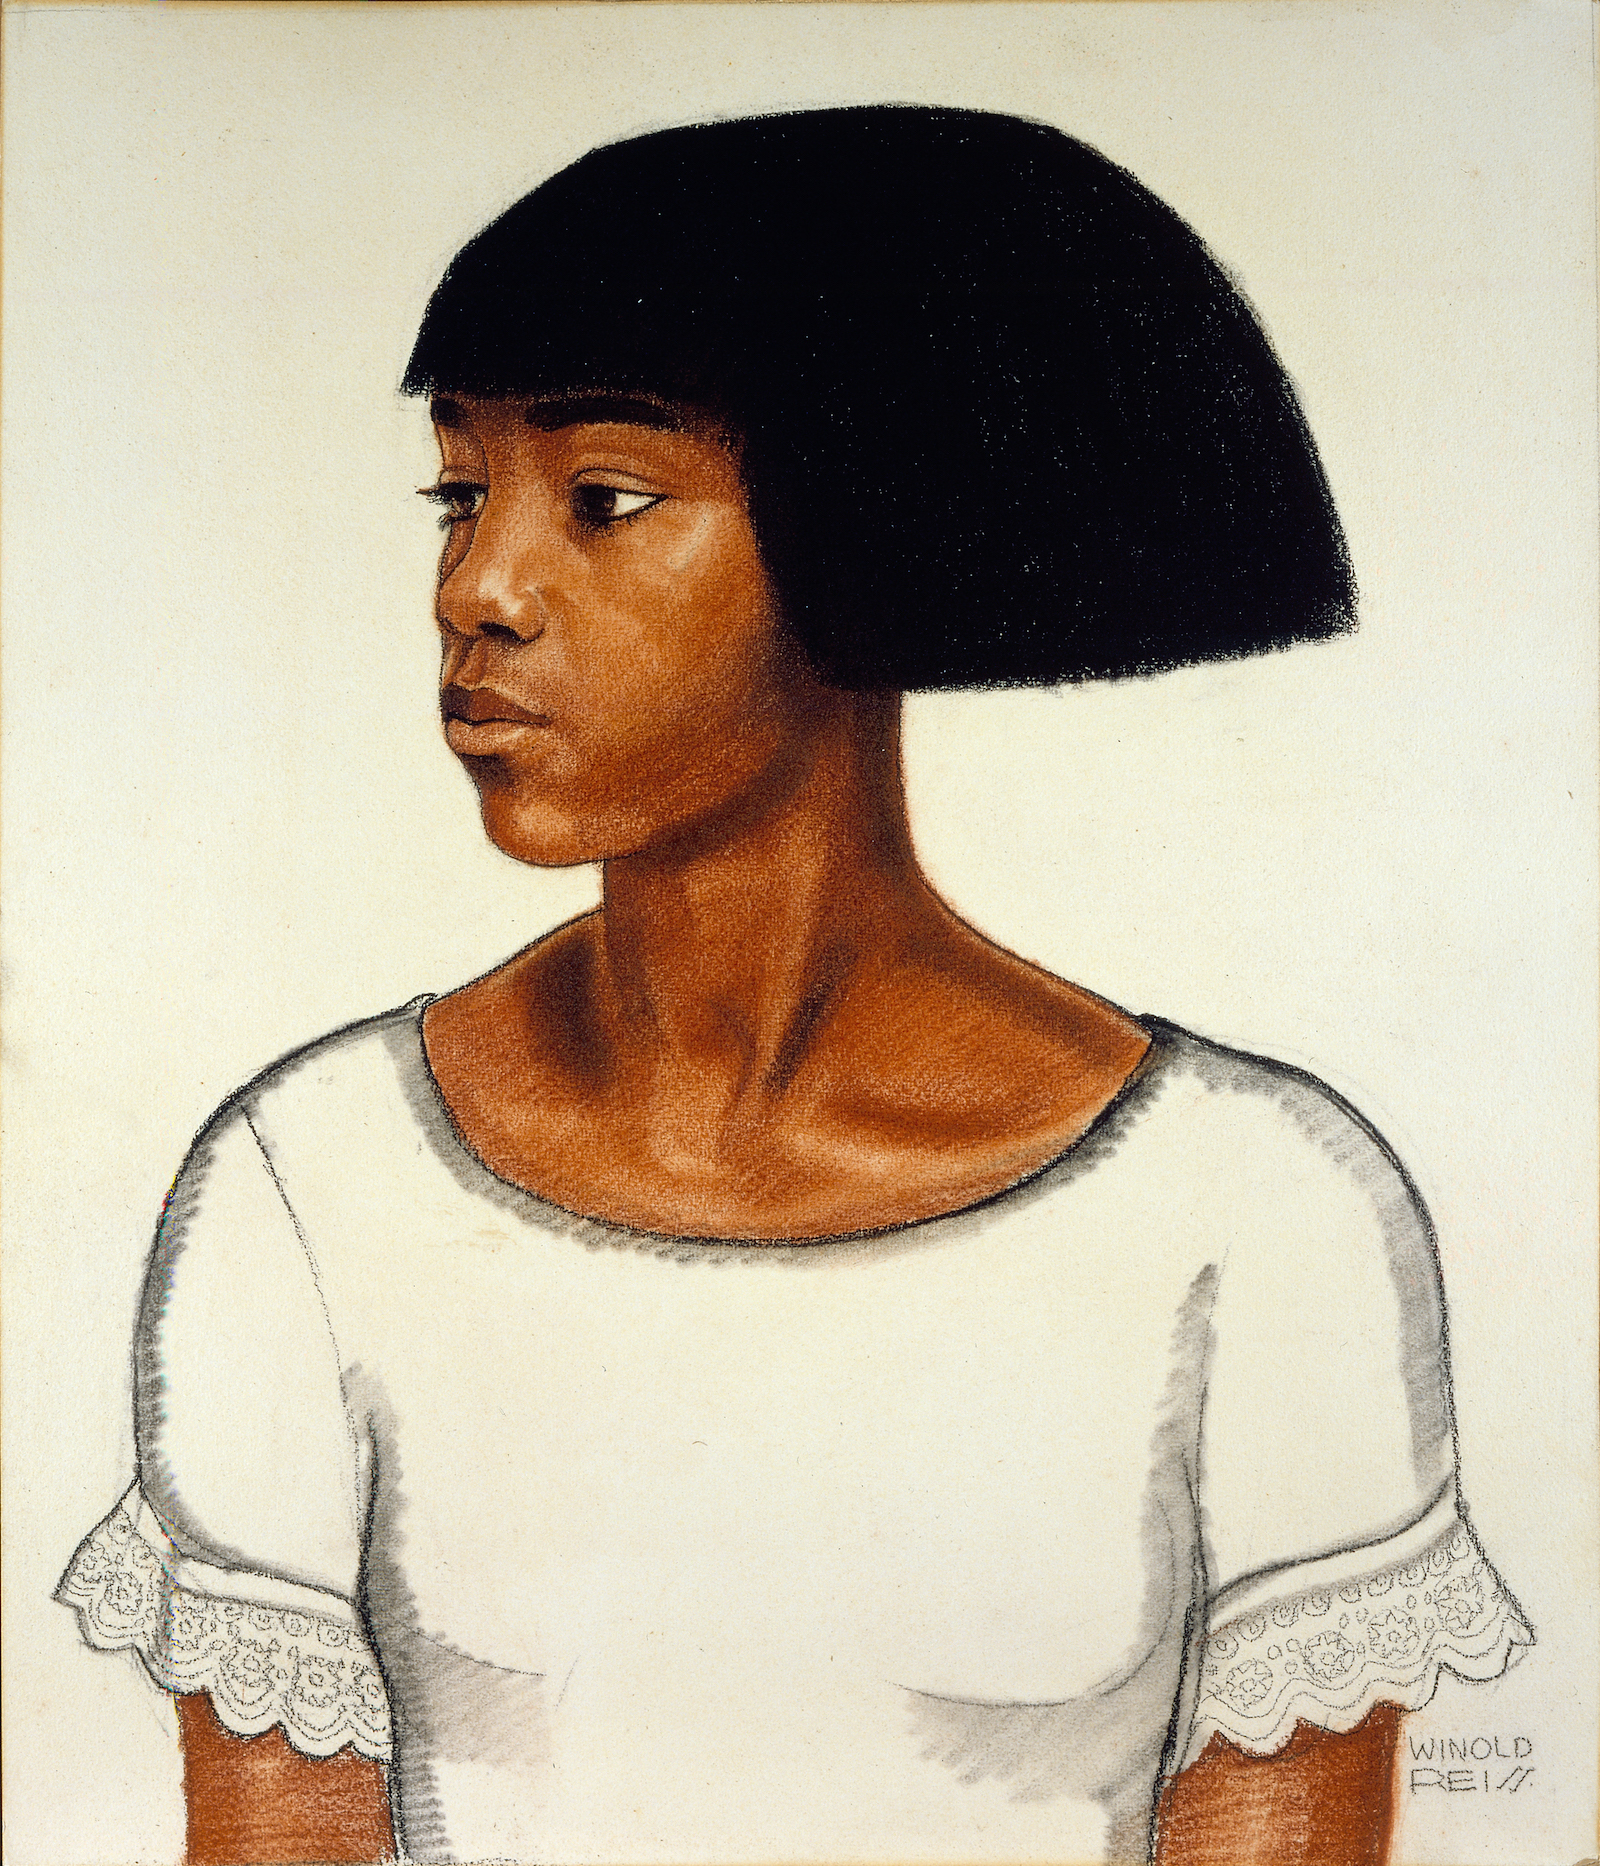 Winold Reiss (1886–1953) Harlem Girl, ca. 1925 Pencil, charcoal and pastels on heavy illustration board, 21 x 14 in. Museum of Art and Archeology, University of Missouri